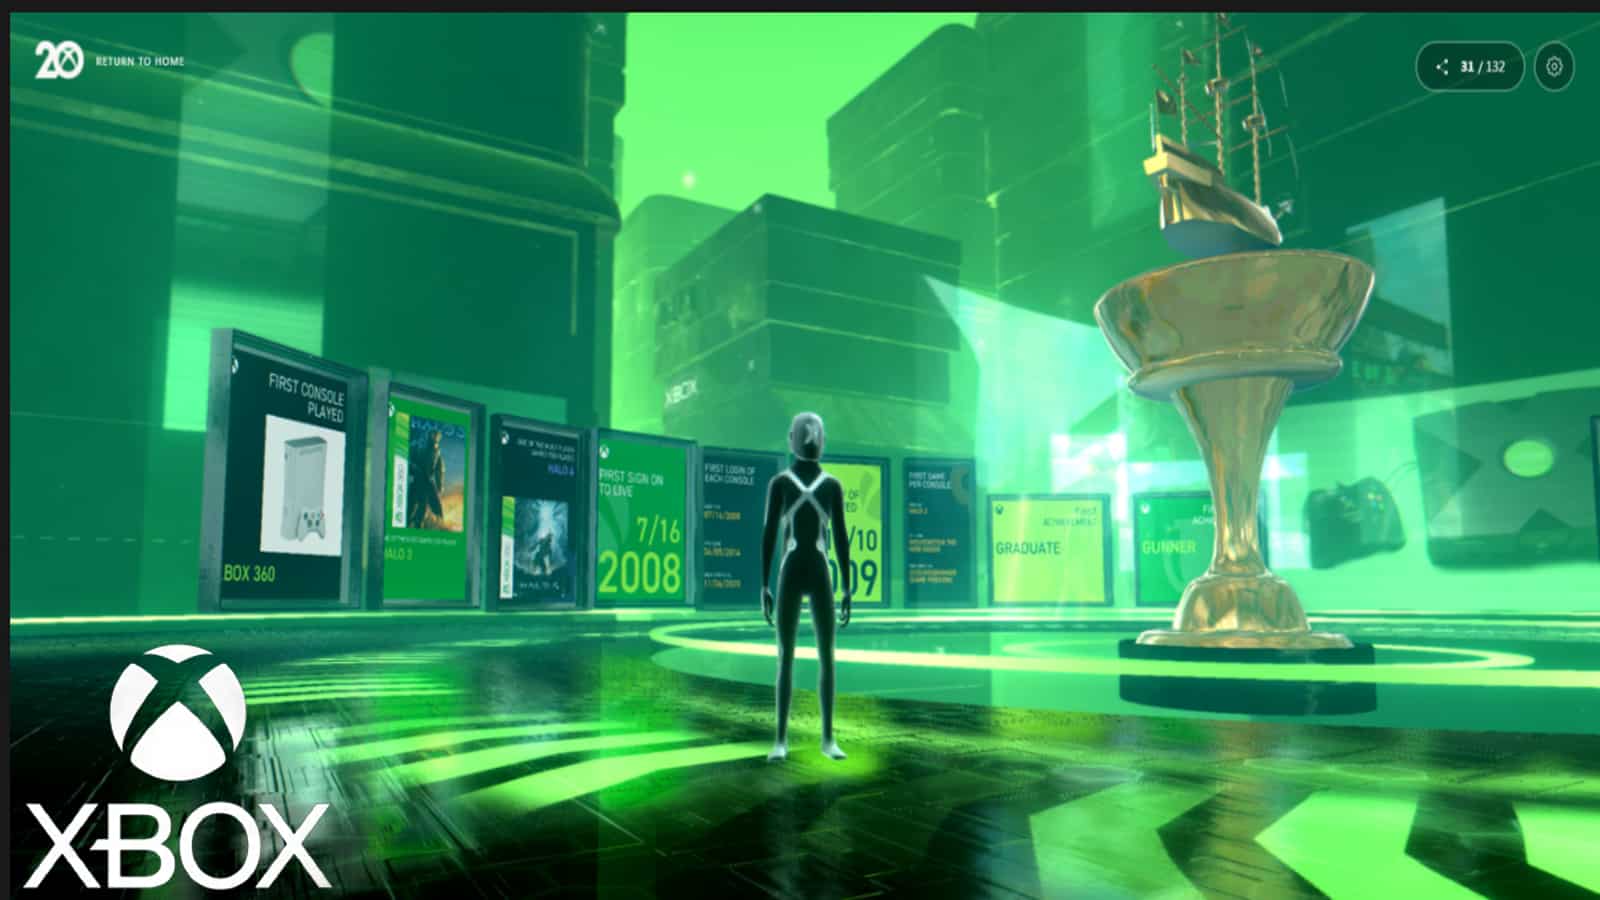 Xbox Museum showcase image with Xbox logo attached